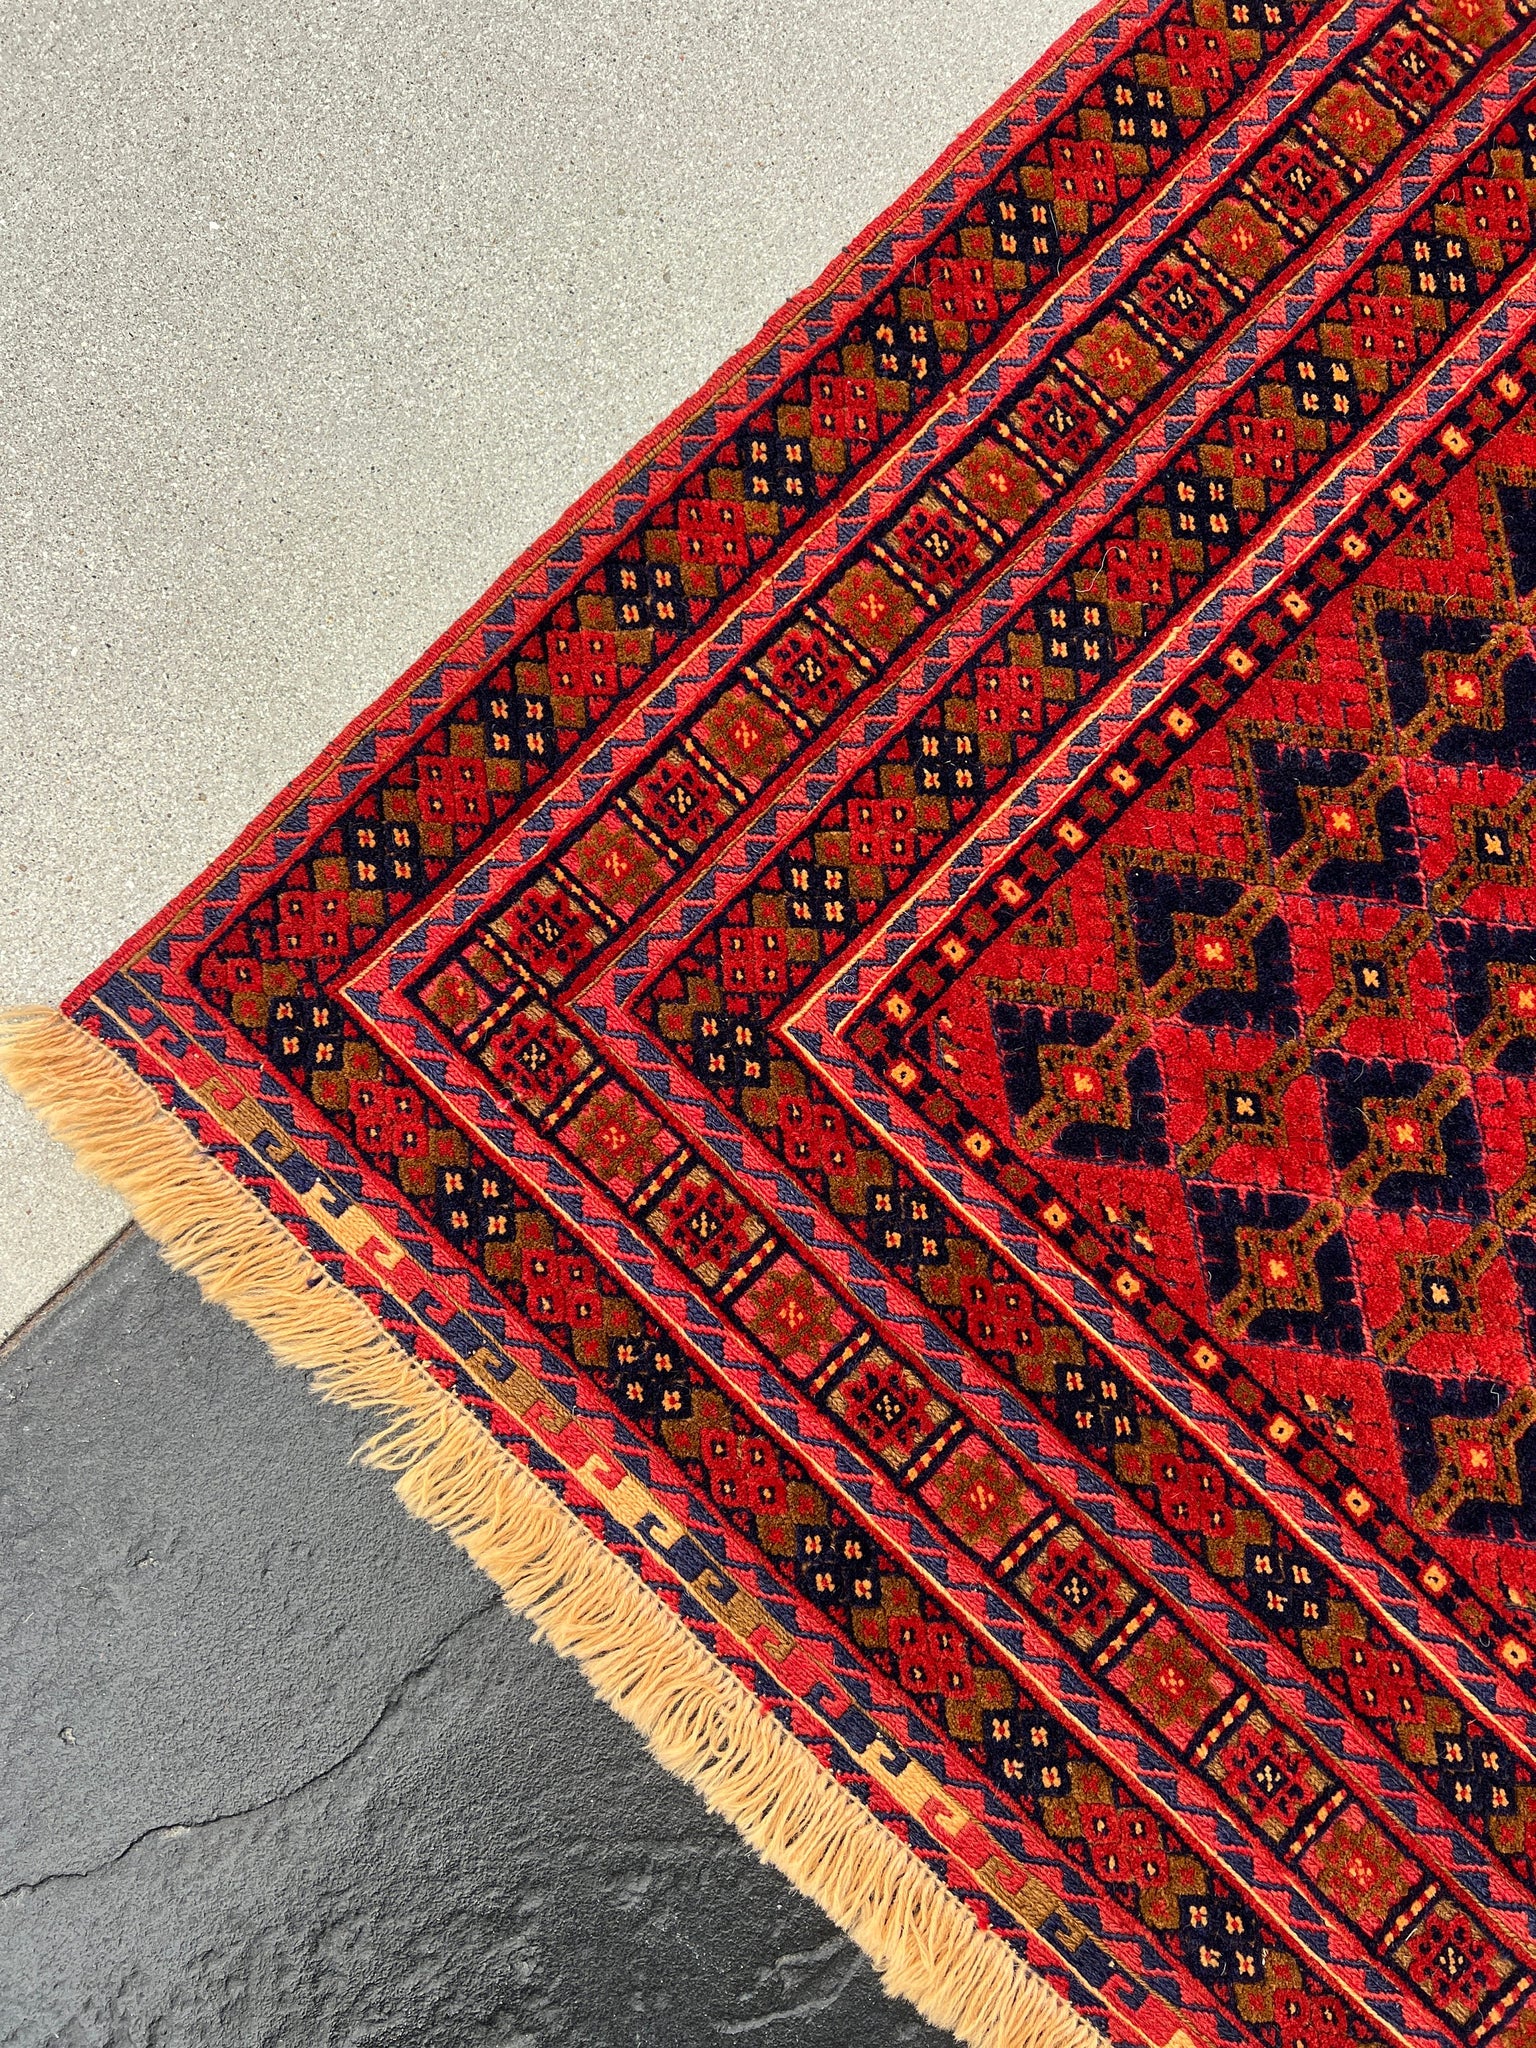 5x6 (150x215) Handmade Vintage Baluch Afghan Rug | Blood Crimson Red Navy Blue Taupe Chocolate Orange Olive Green | Hand Knotted Wool